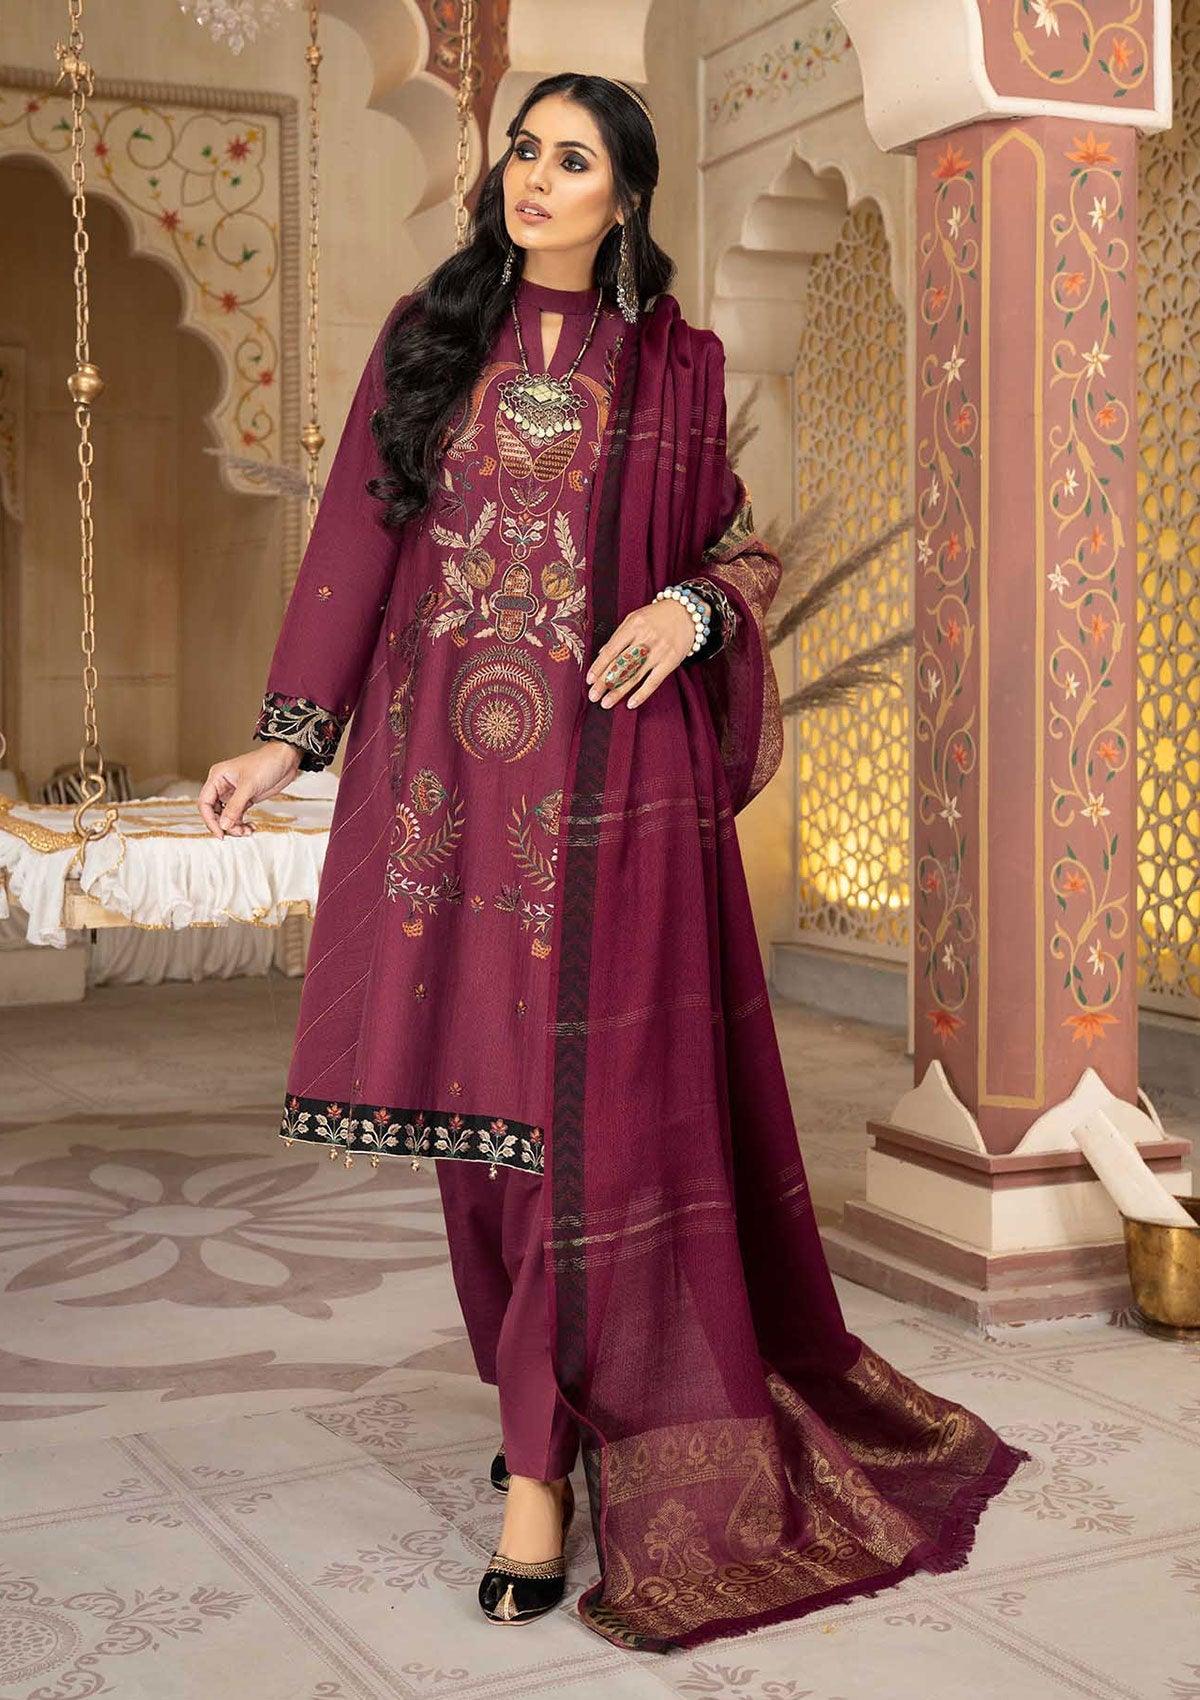 Buy Anamta latest collection at Mohsin Saeed Fabrics. high quality and trendy designs Check Price and Shop Online. ✓ Free Shipping ✓ Cash on Delivery ✓ Best women clothing Store in Pakistan